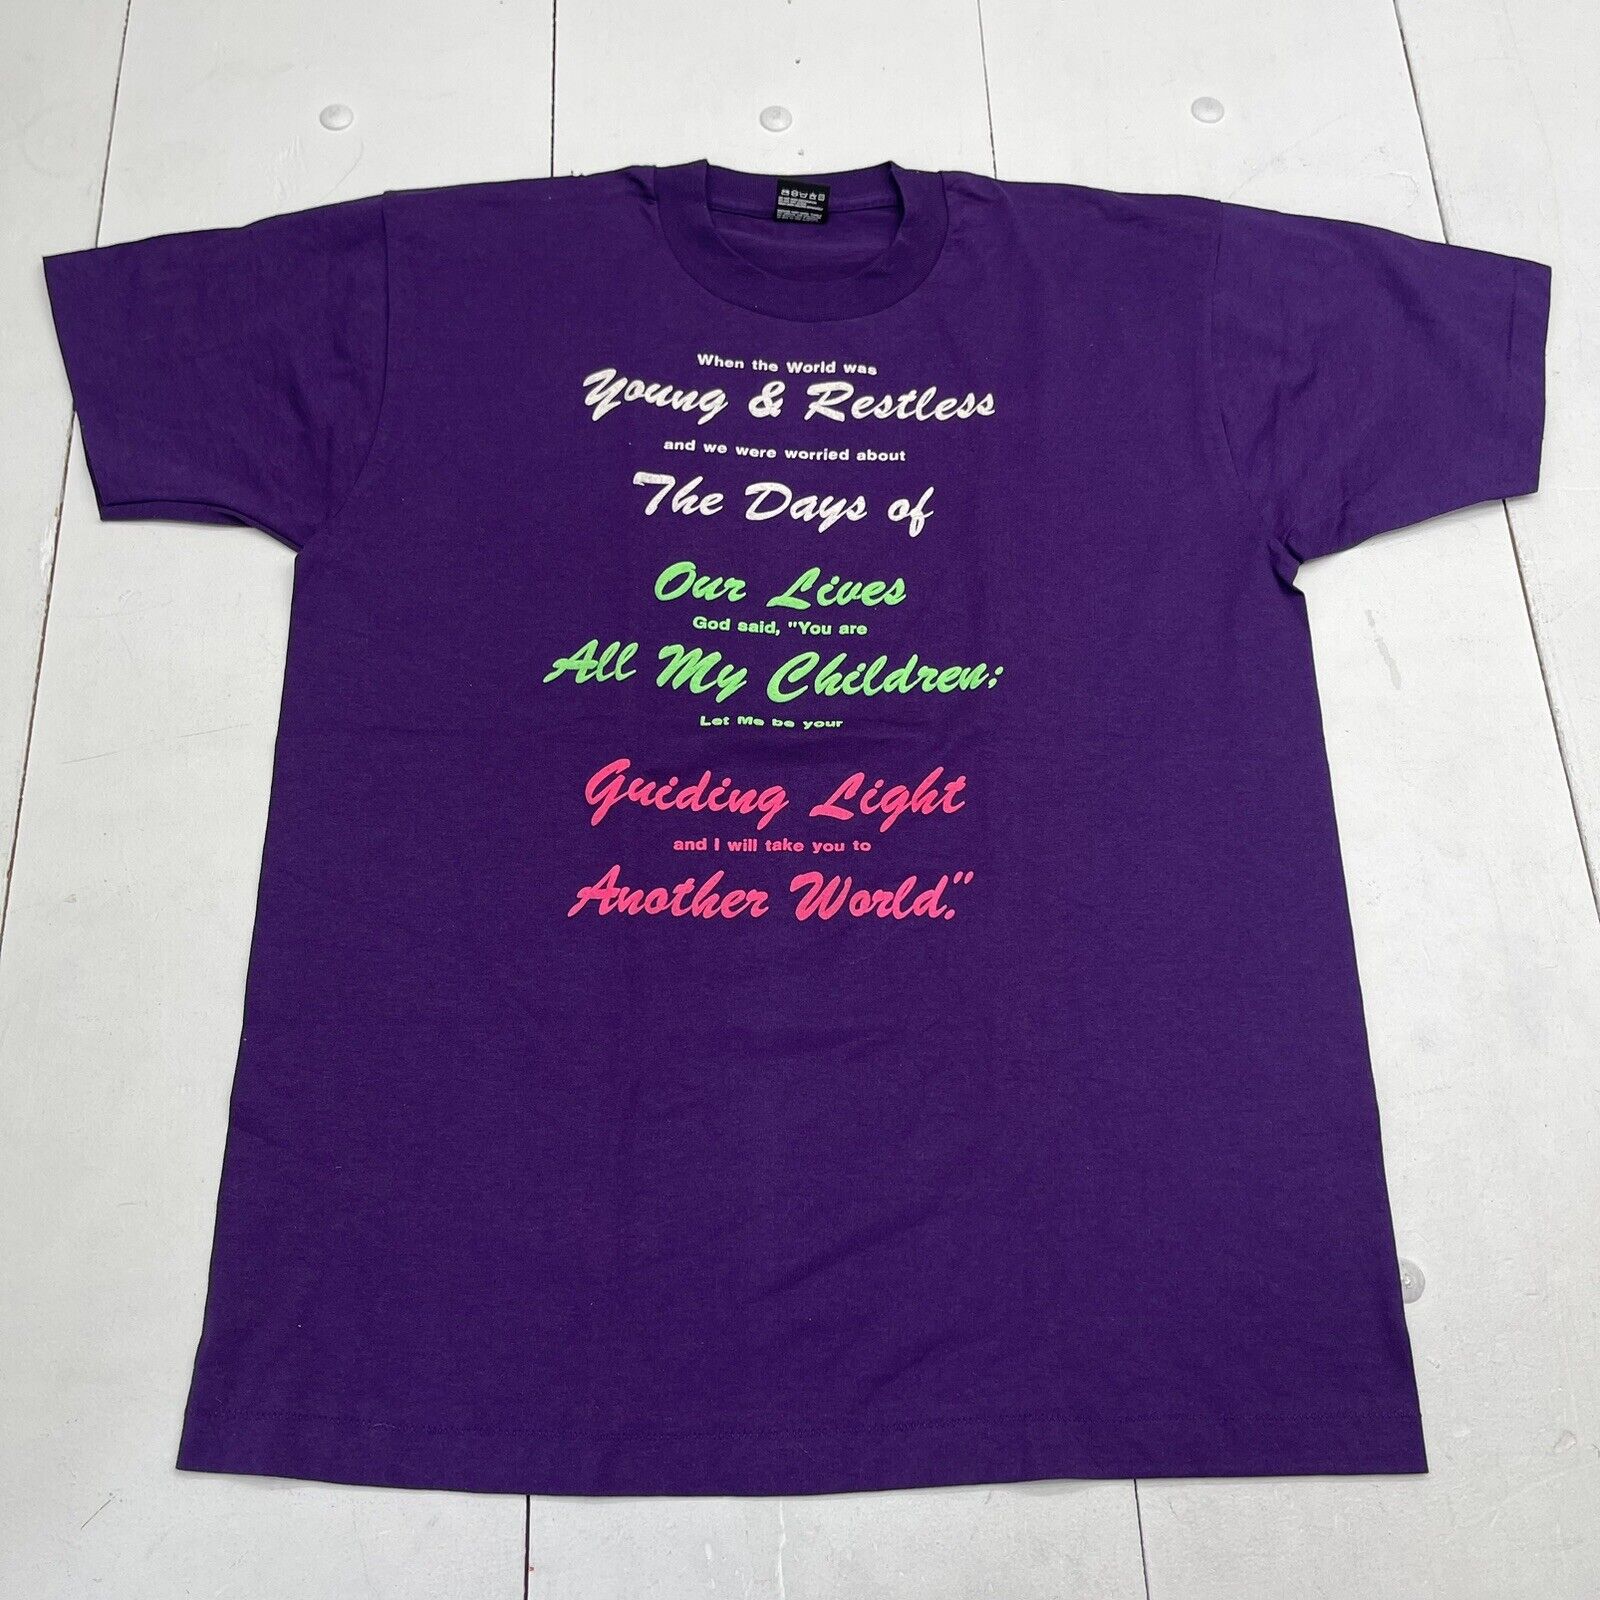 Vintage Purple When The World Was Young & Restless T Shirt Adults XL